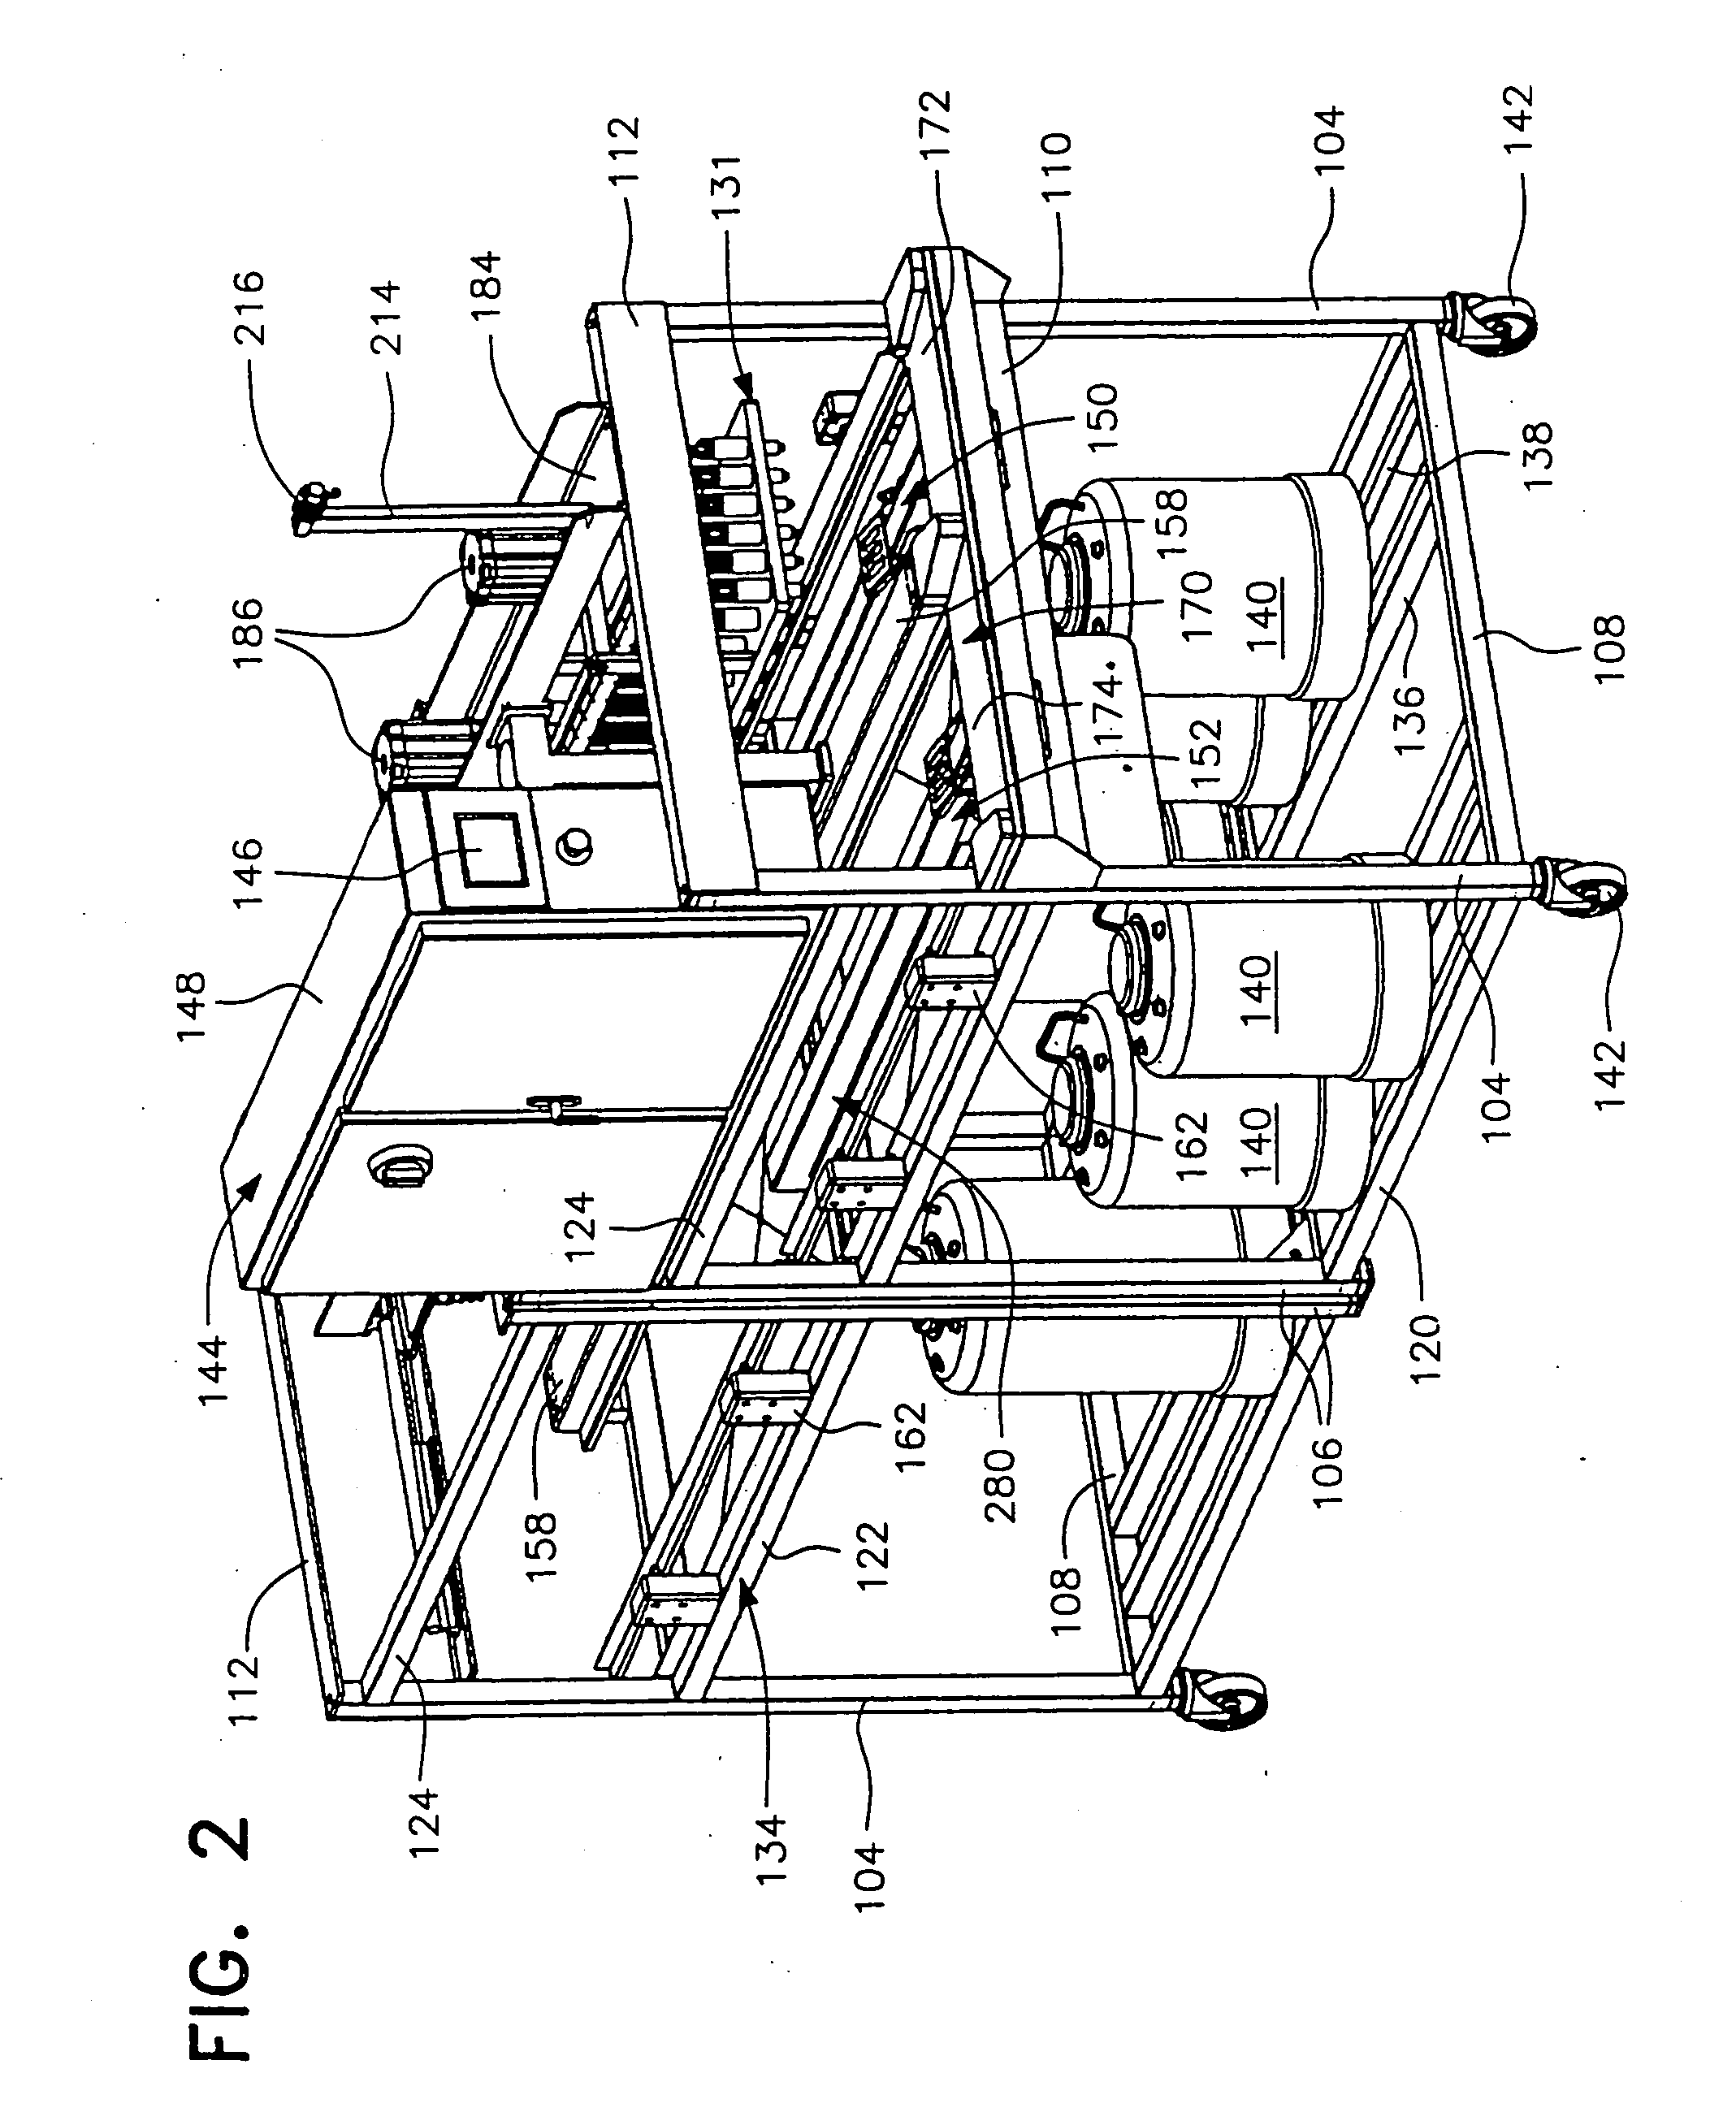 Automated egg injection machine and method